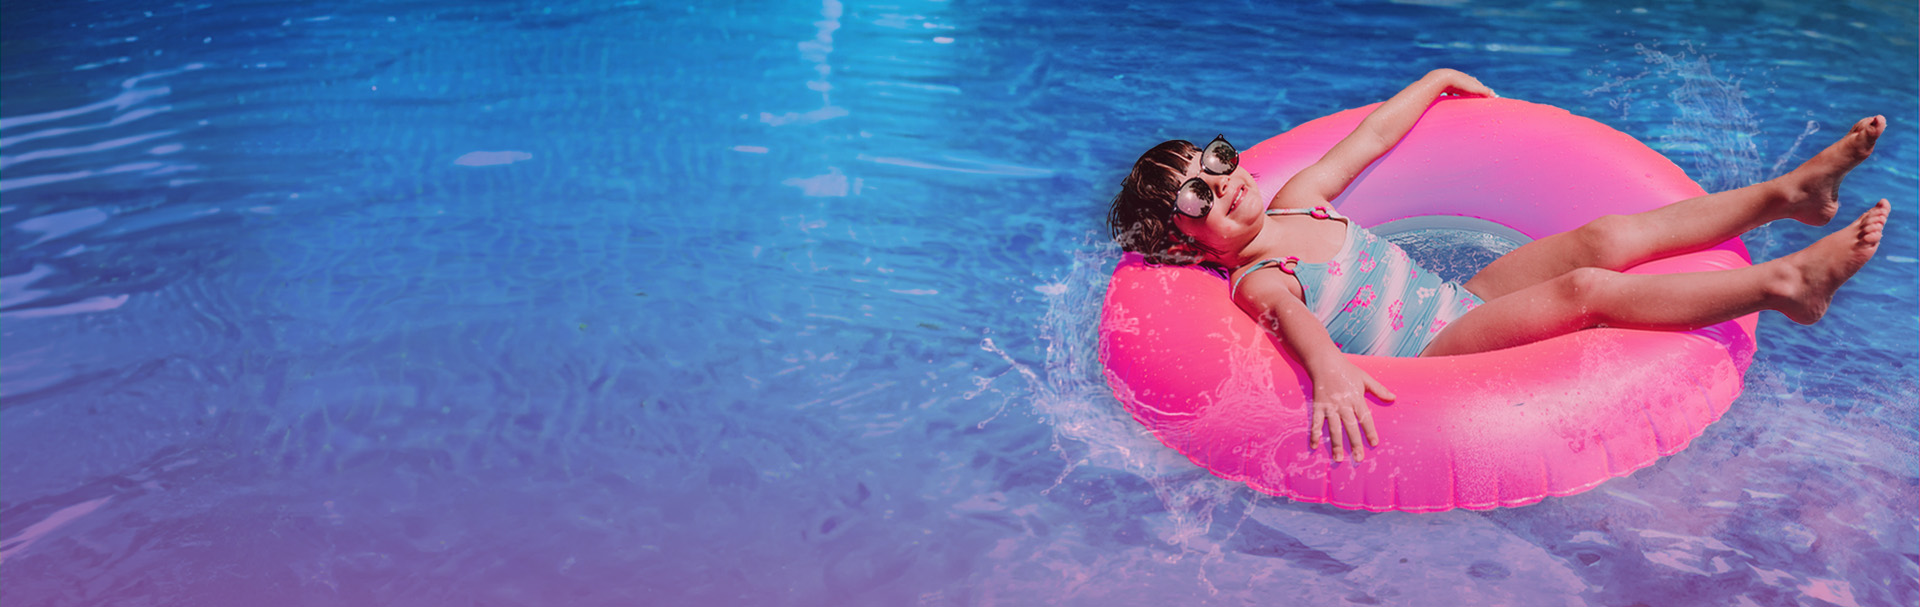 young girl floating on a pink inner tube in water